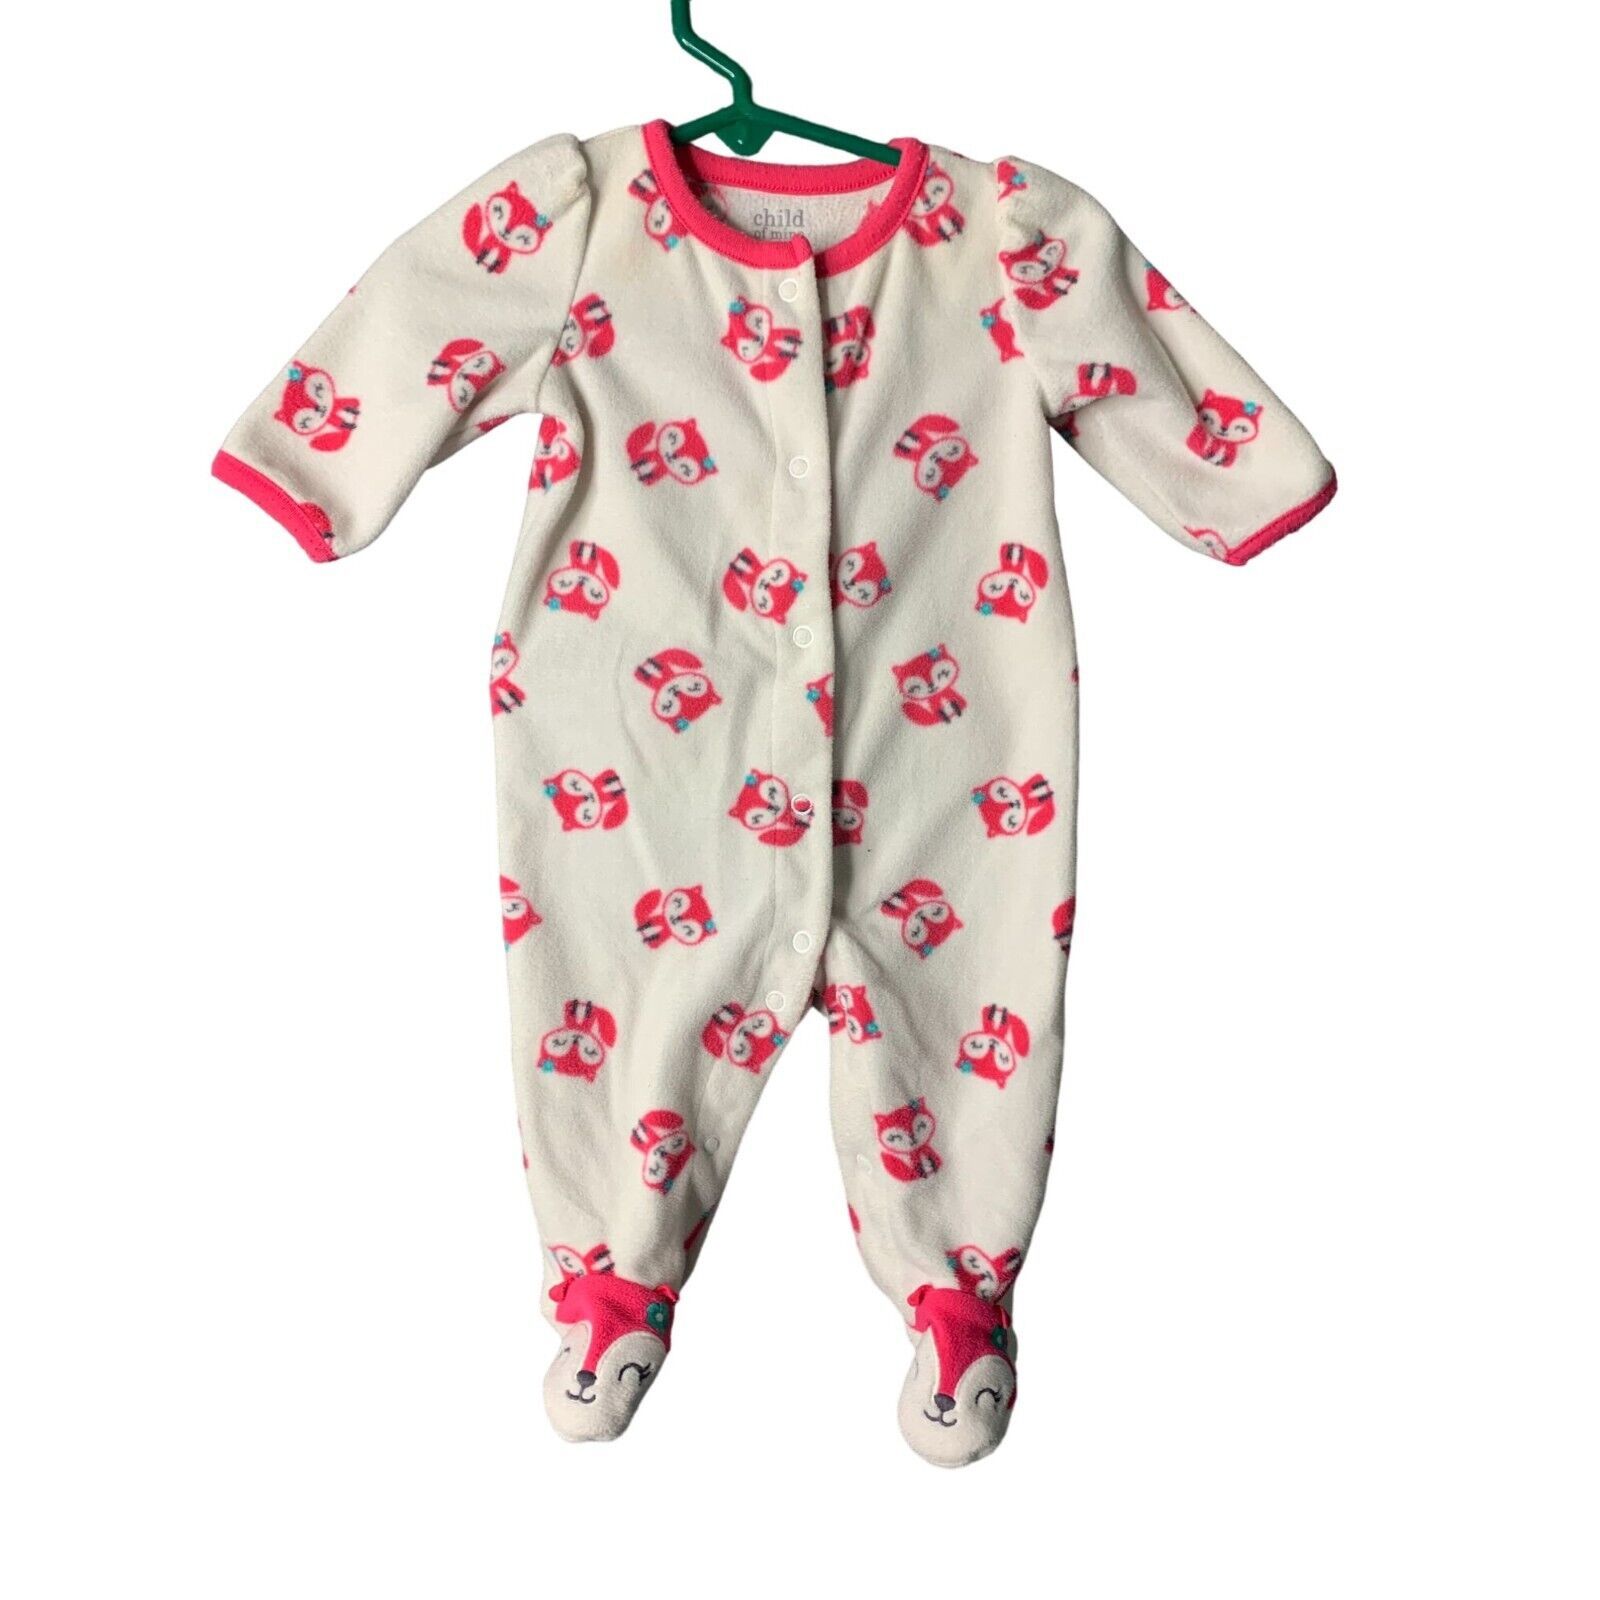 Child Of Mine Girls Infant Baby Size 0 3 Months Pink 1 Piece Footed Pajamas Whit - $7.69